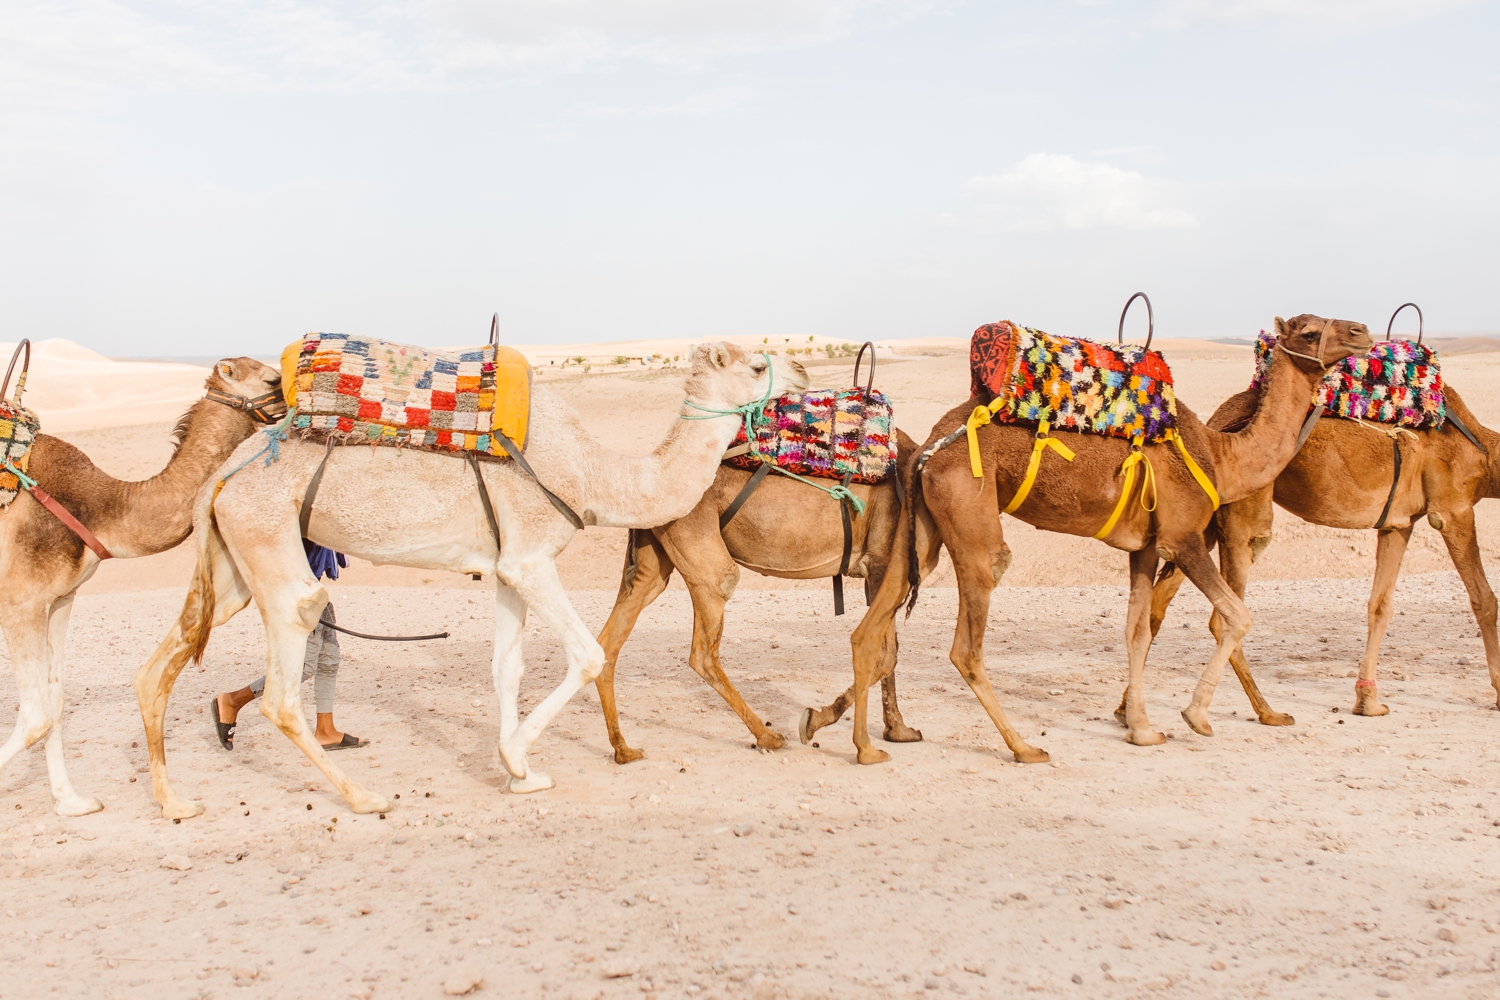 Camels with colorful saddles walking in Afgay Desert in Morocco | Brooke Michelle Photography